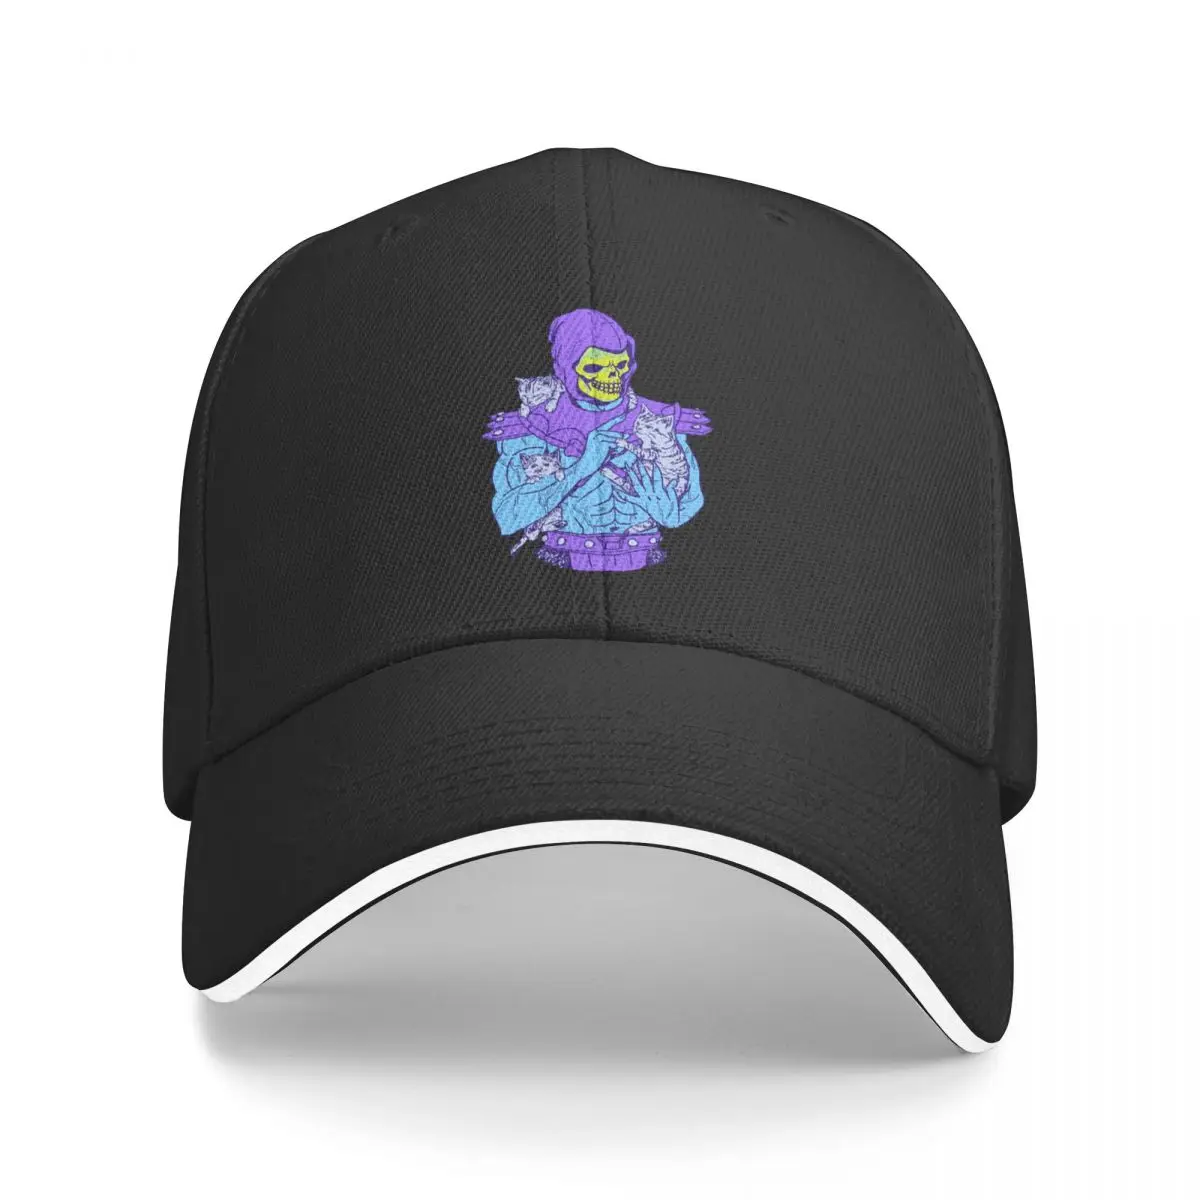 

Skeletor Meowniverse He-Man and the Masters of the Universe Multicolor Hat Peaked Women's Cap Personalized Visor Cycling Hats